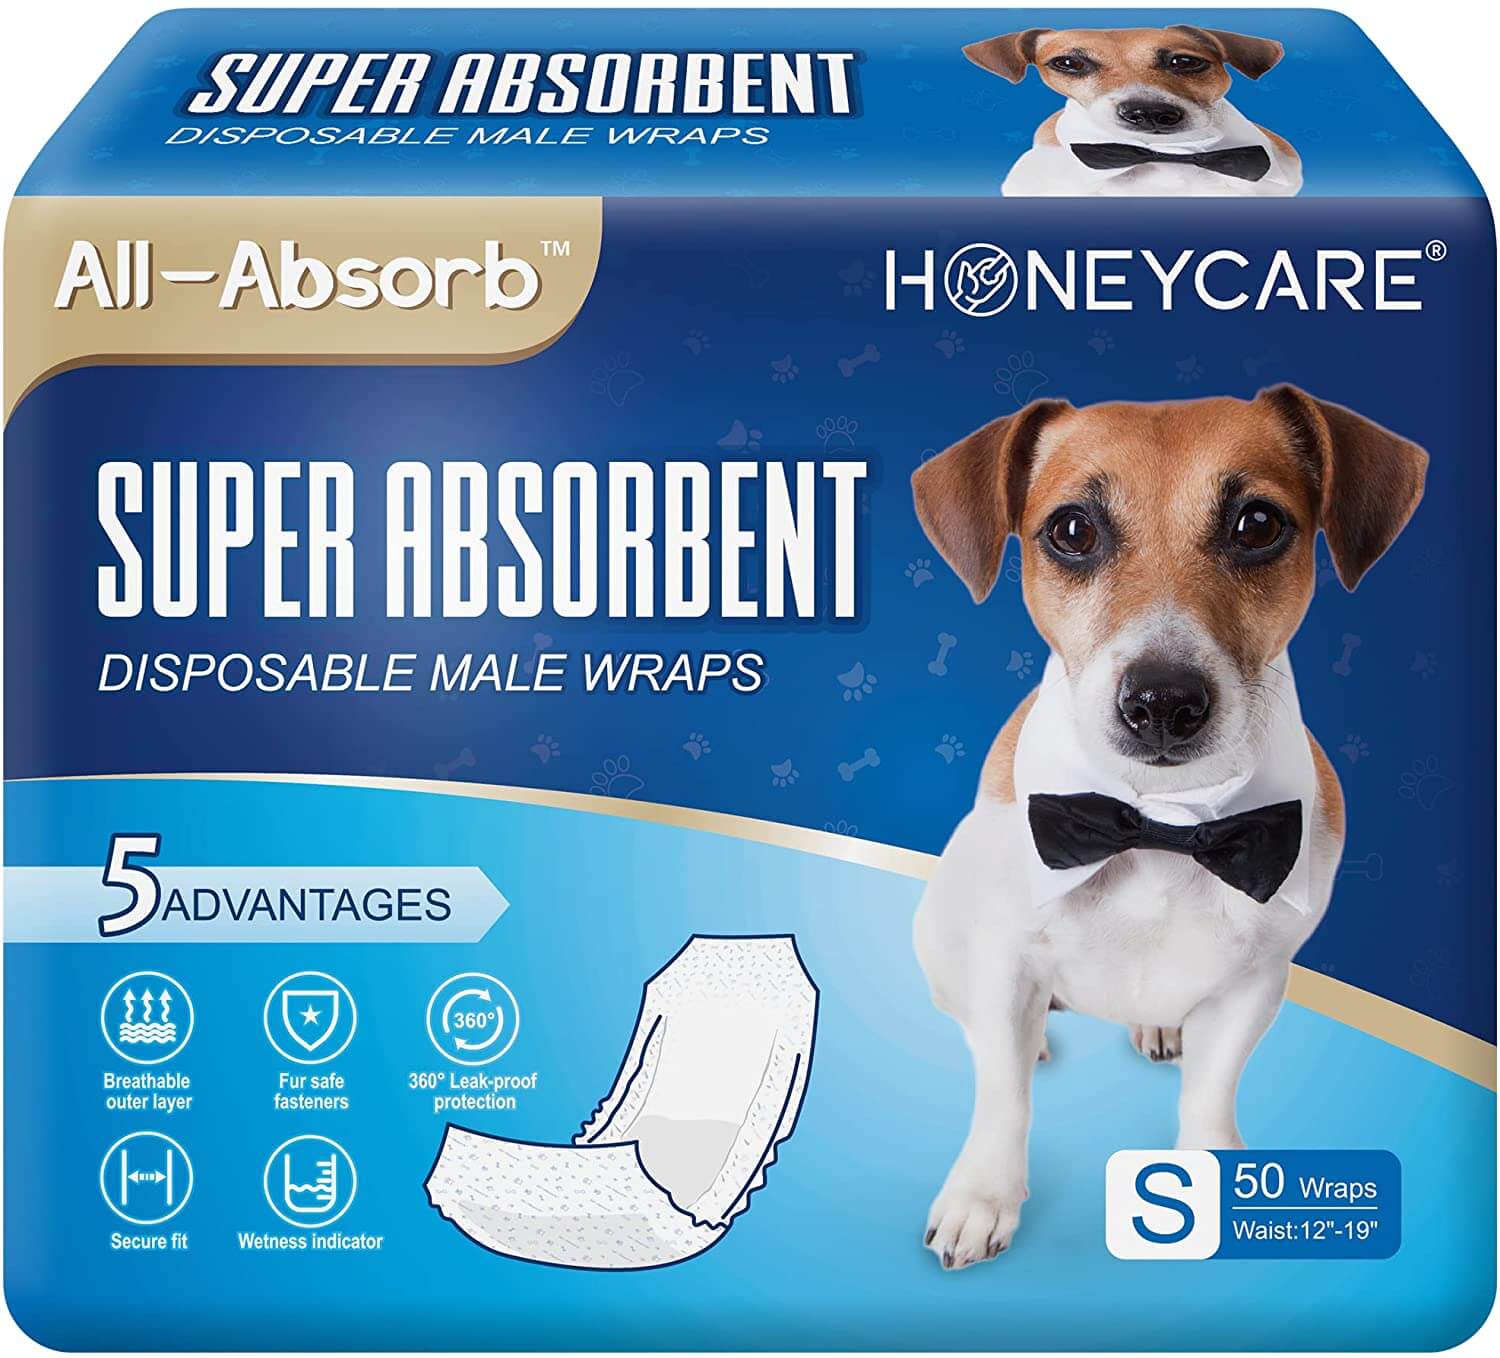 All-Absorb Male Dog Wrap